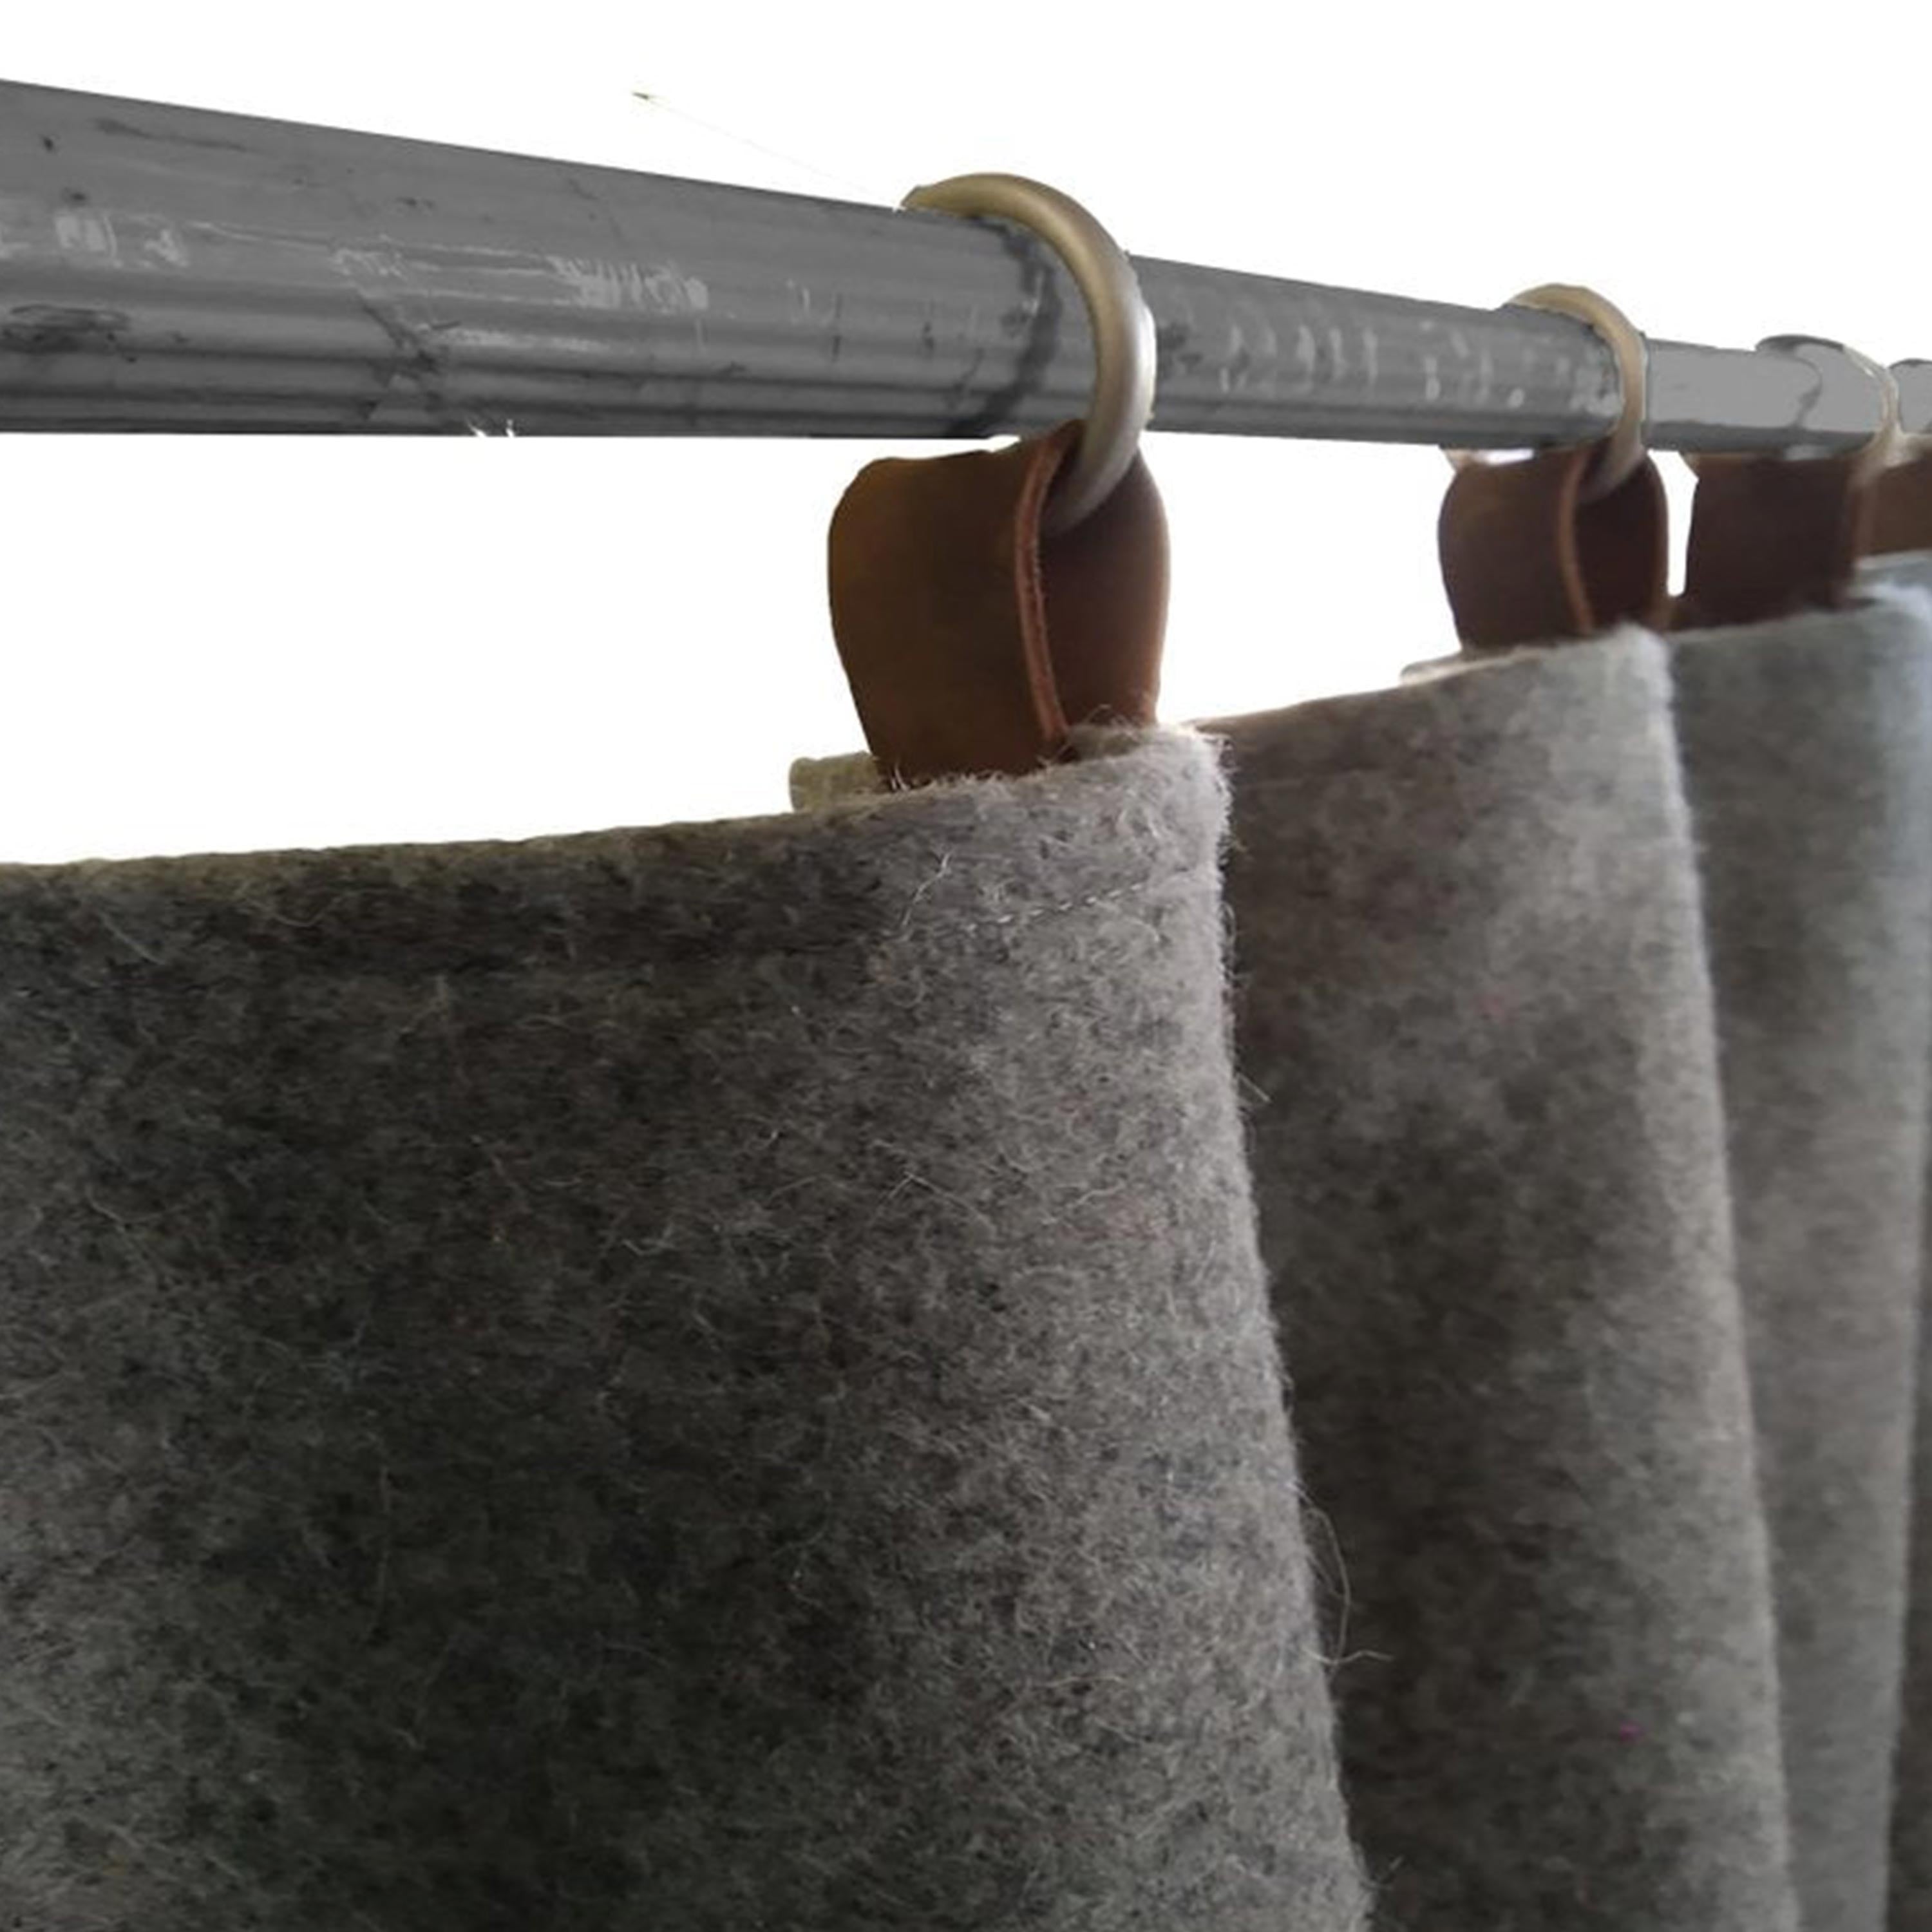 Wool Felt Curtains with Genuine Leather Tabs